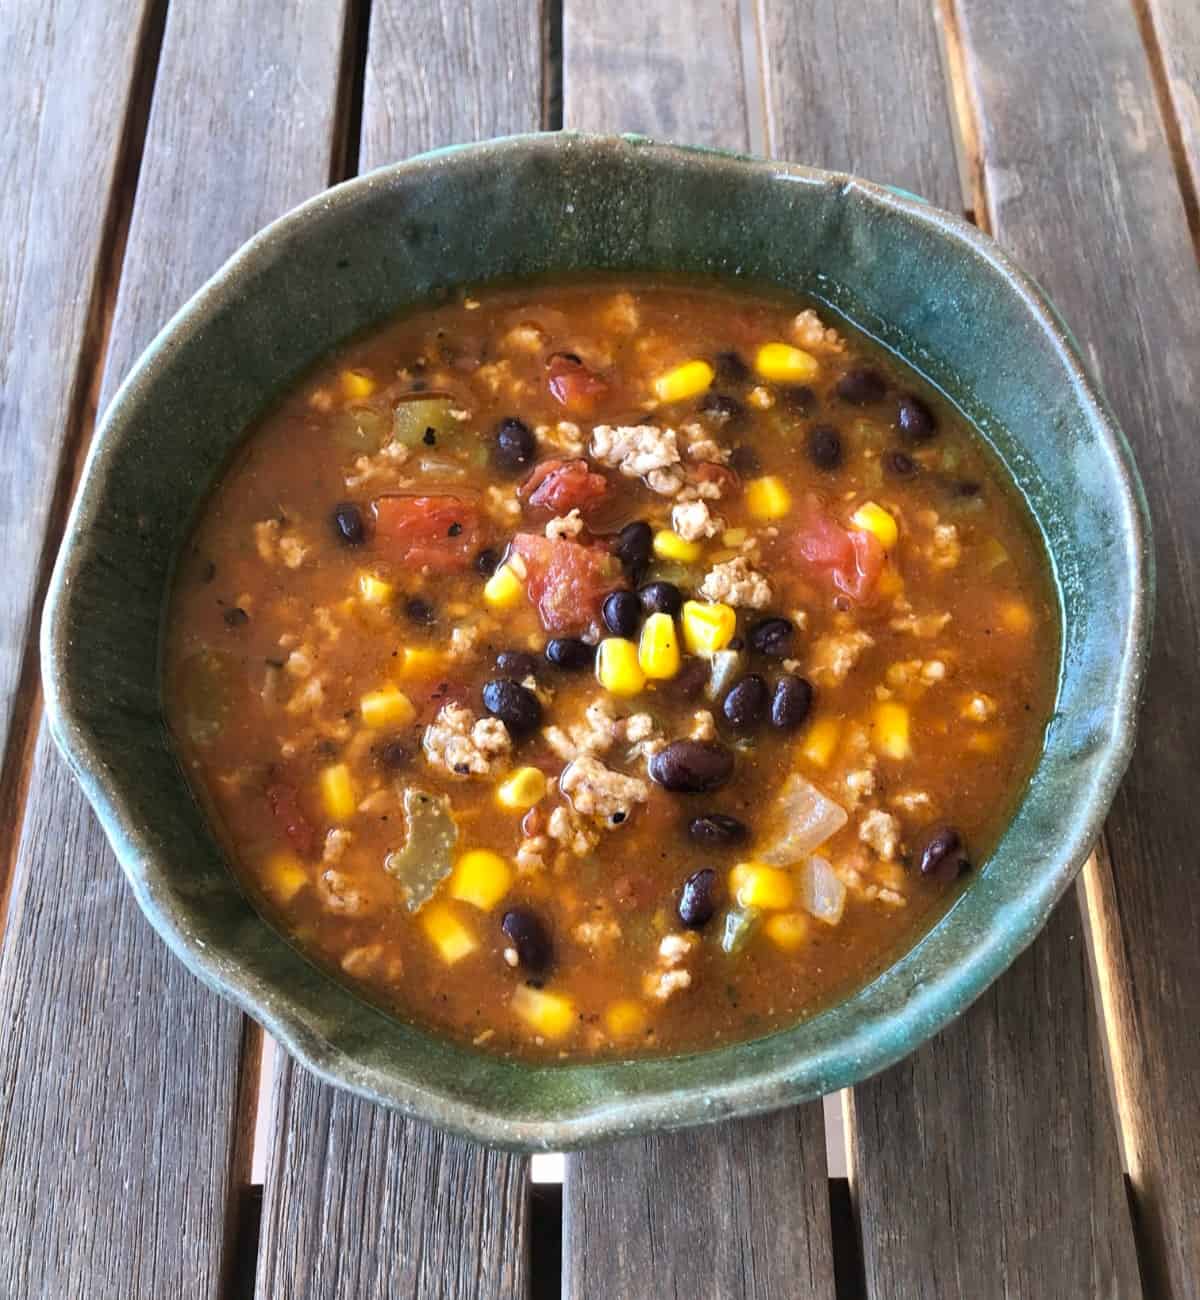 Instant pot turkey taco soup in green ceramic bowl on wooden table.